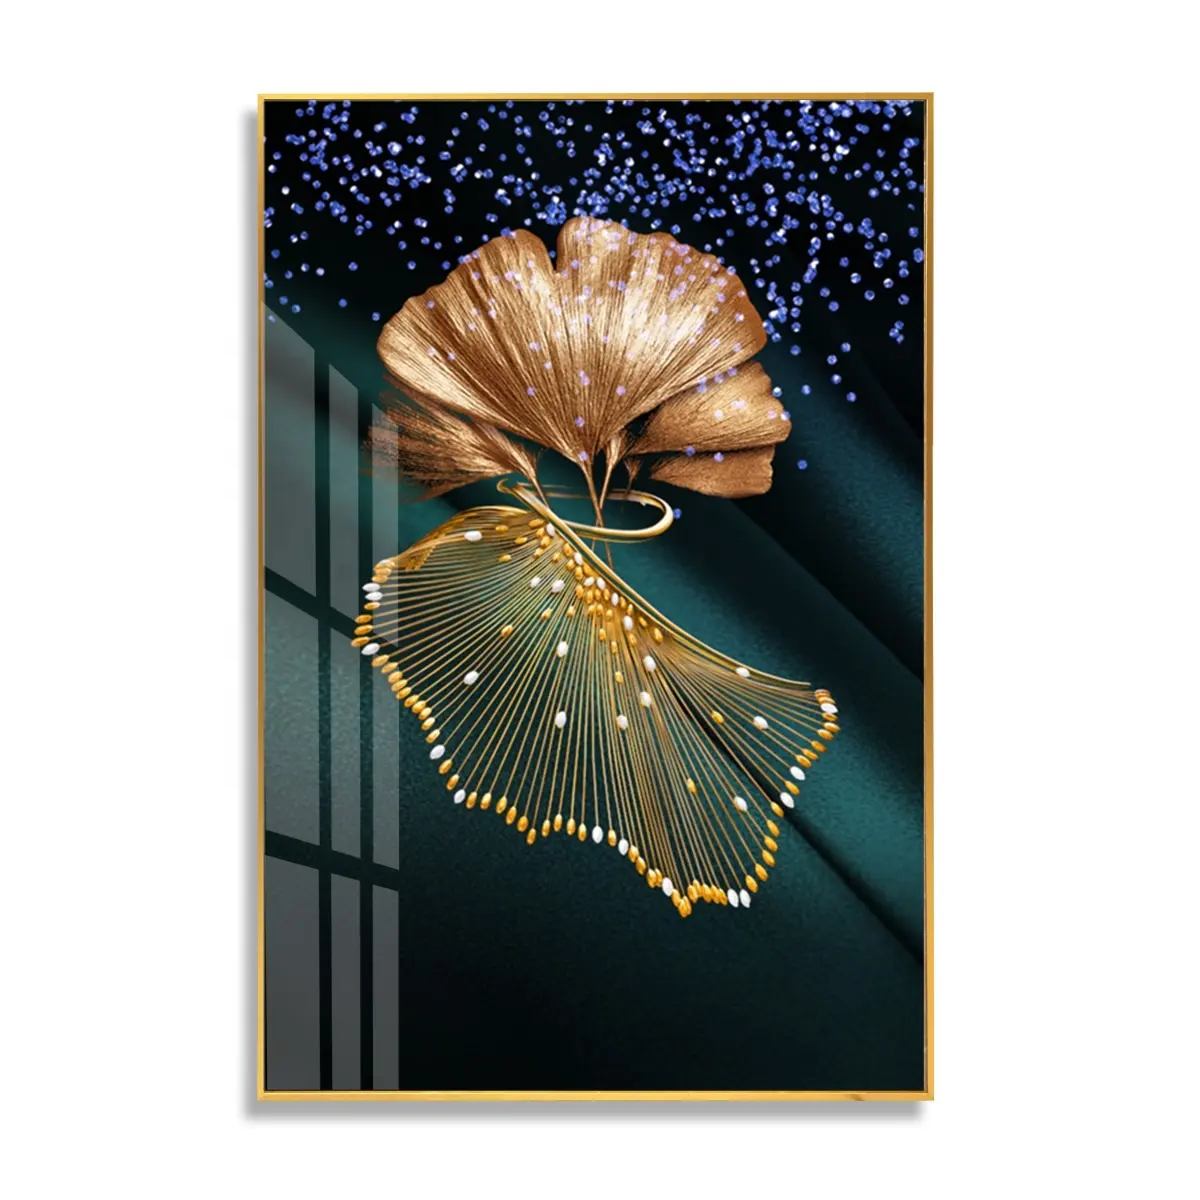 Golden Leaf Art Crystal Porcelain Abstract Decorative Wall Painting For Home Decor Hotel